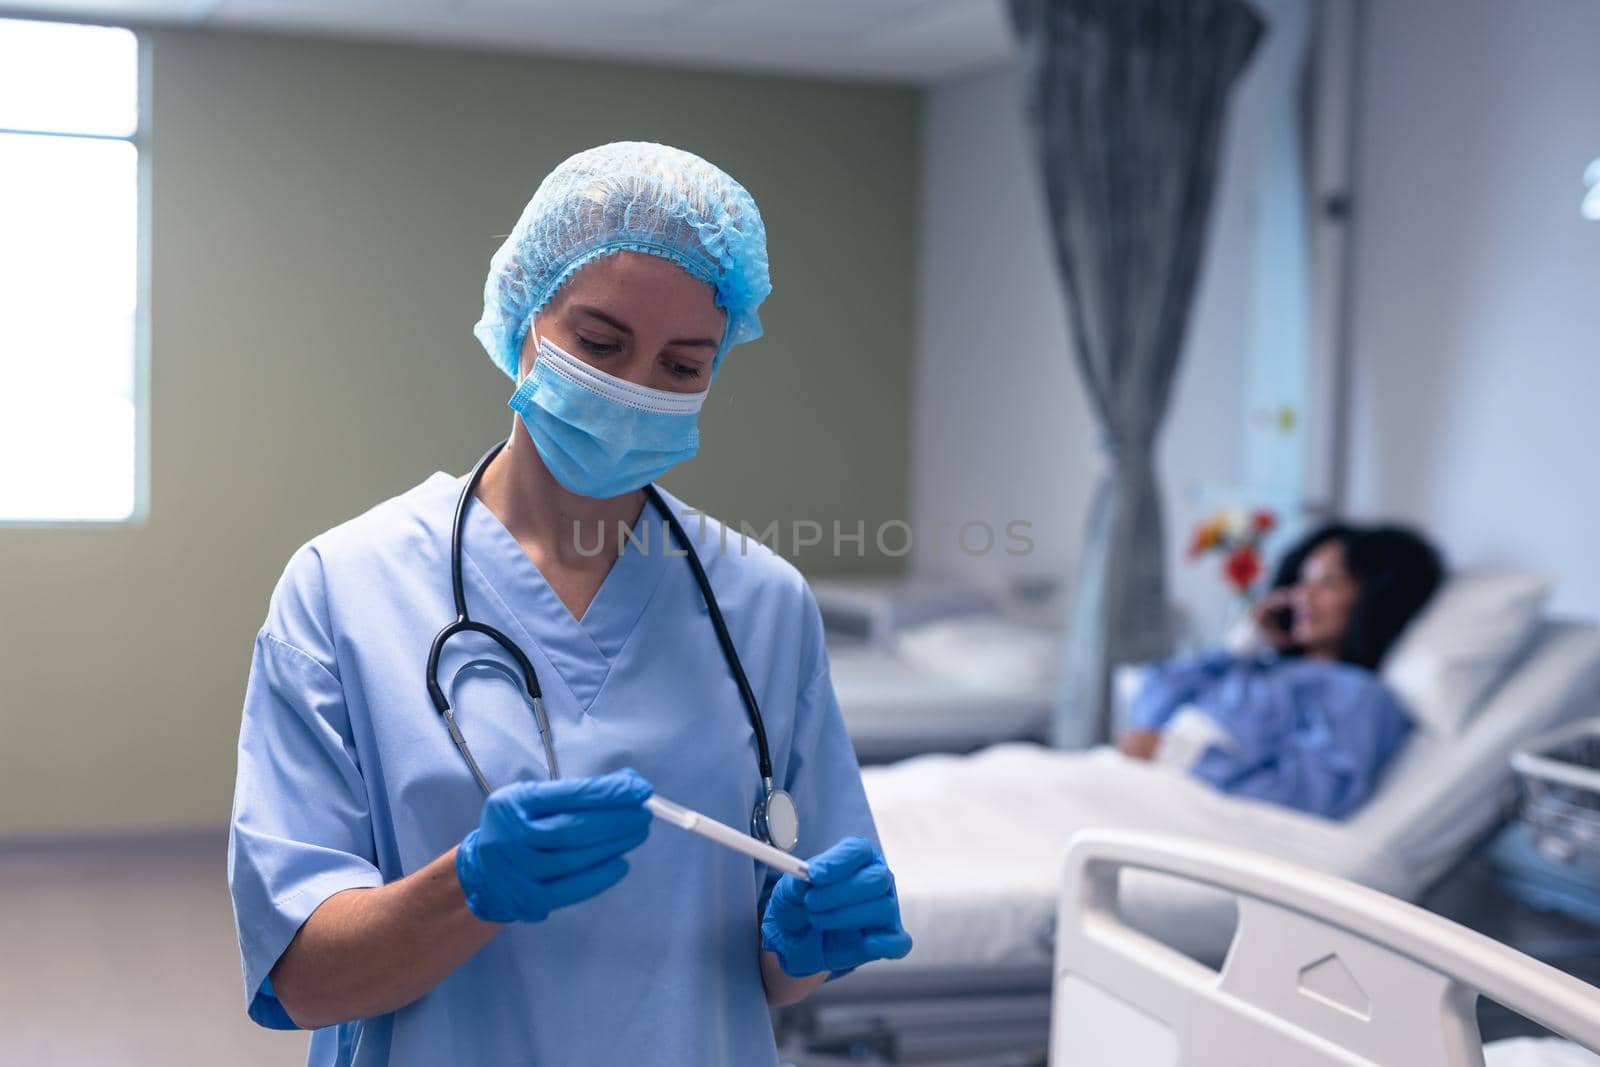 Caucasian female doctor in hospital wearing face mask and surgical gloves holding swab test. medical professional at work during coronavirus covid 19 pandemic.